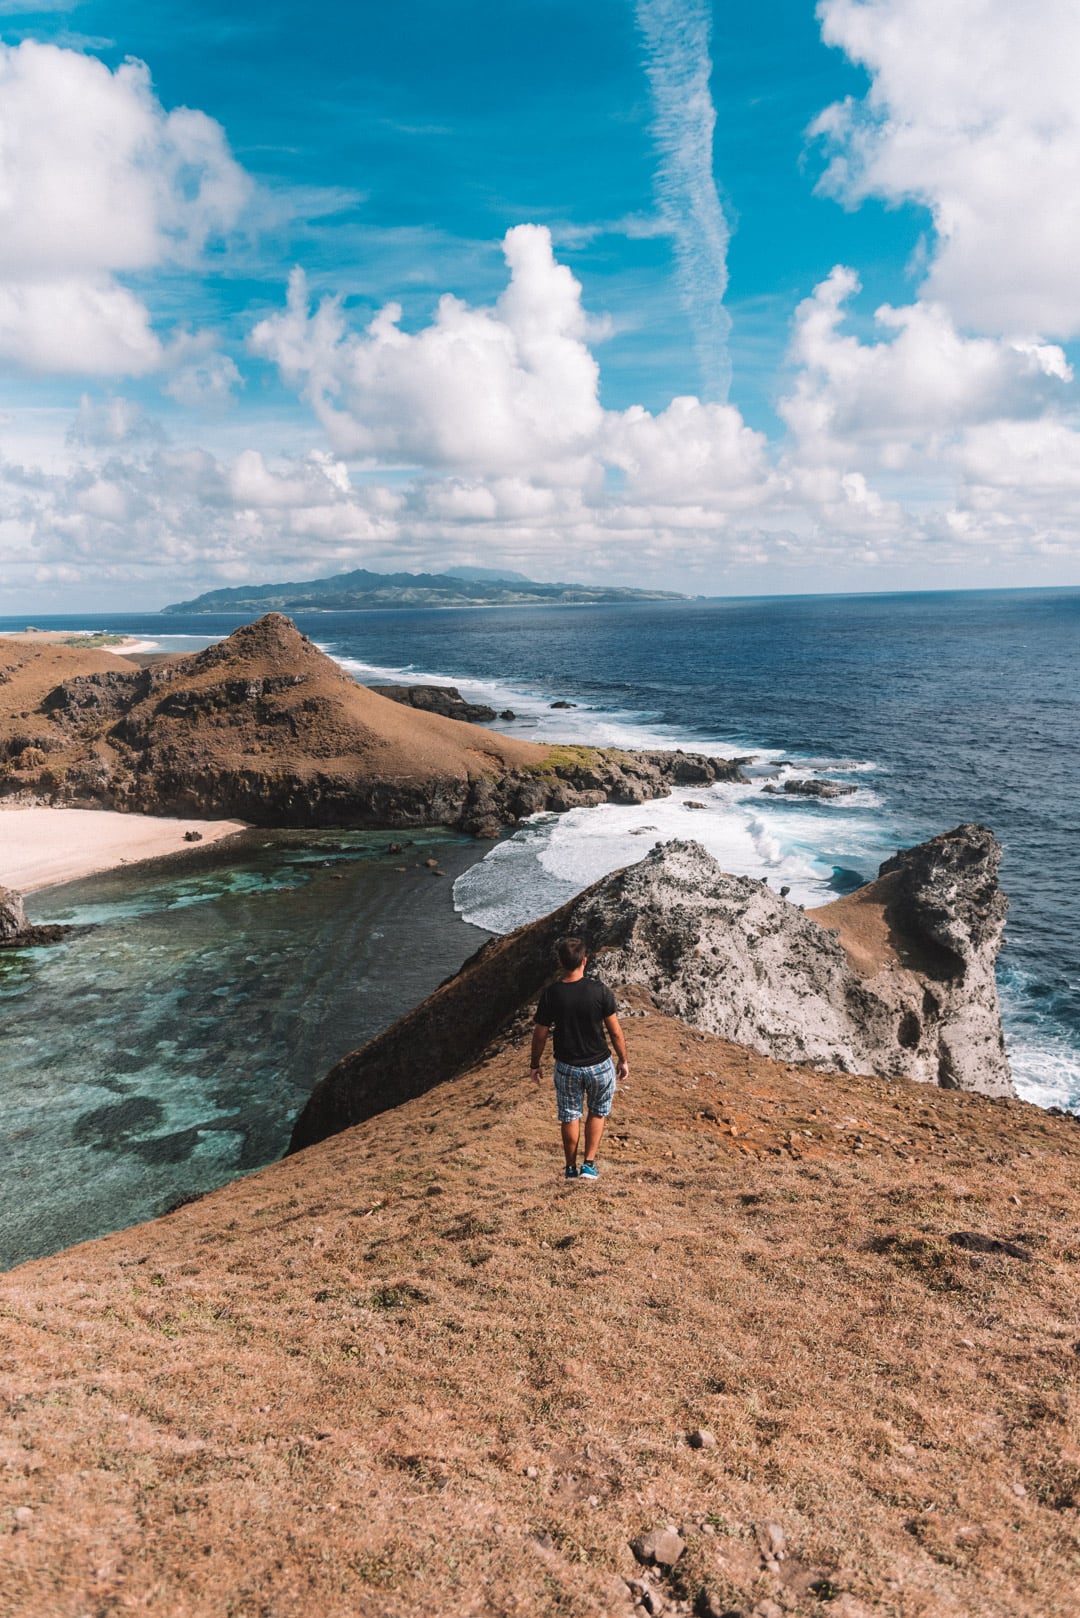 Transportation around Batanes, Batanes tourist spots, atms in batanes, wifi connection in batanes, how to go to Batanes, Sabtang island, tinan viewpoint